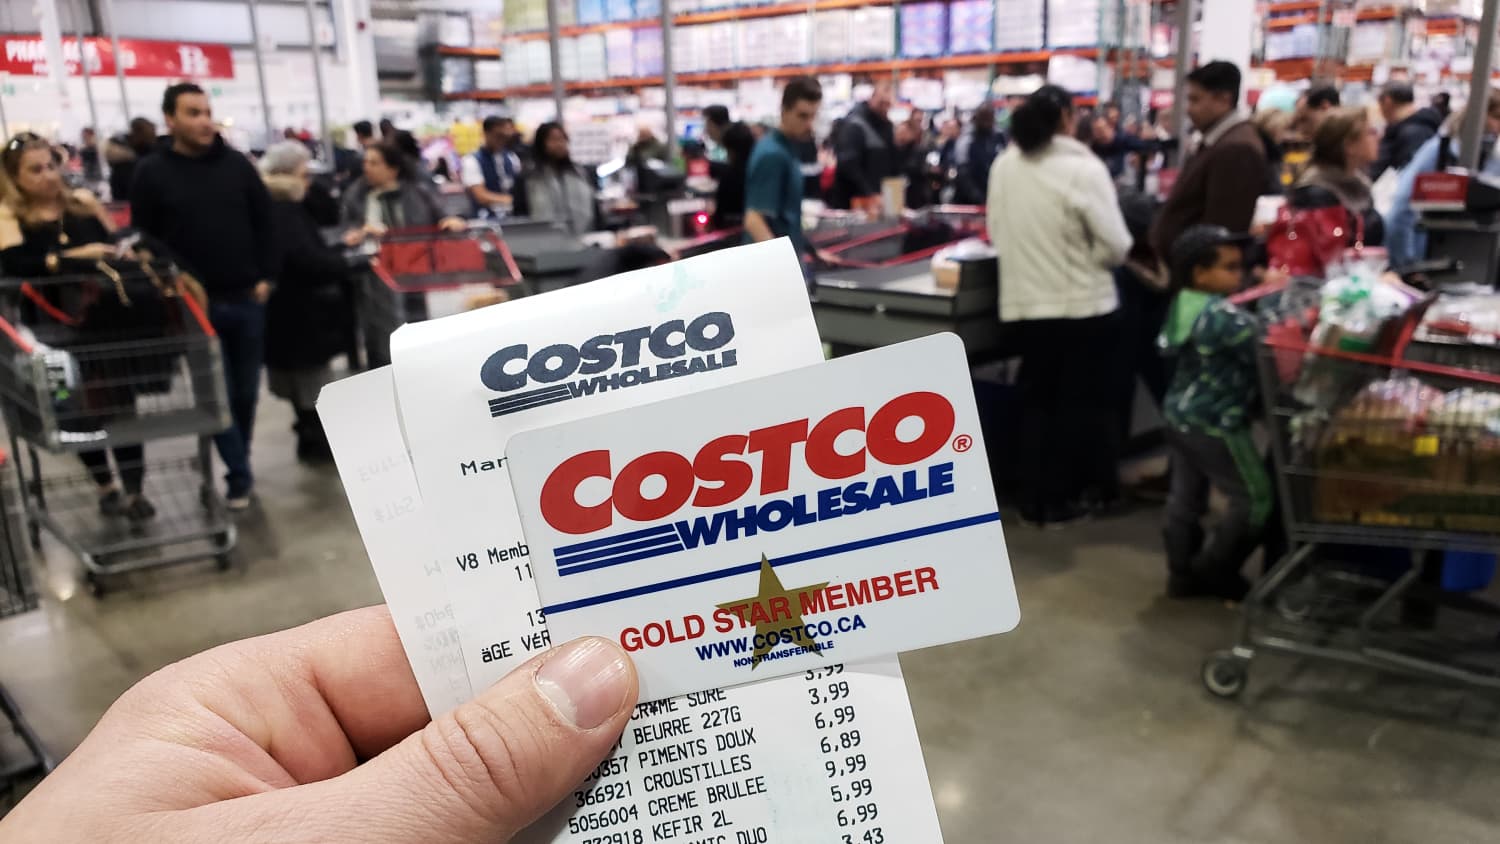 can i buy from costco online and pickup in store